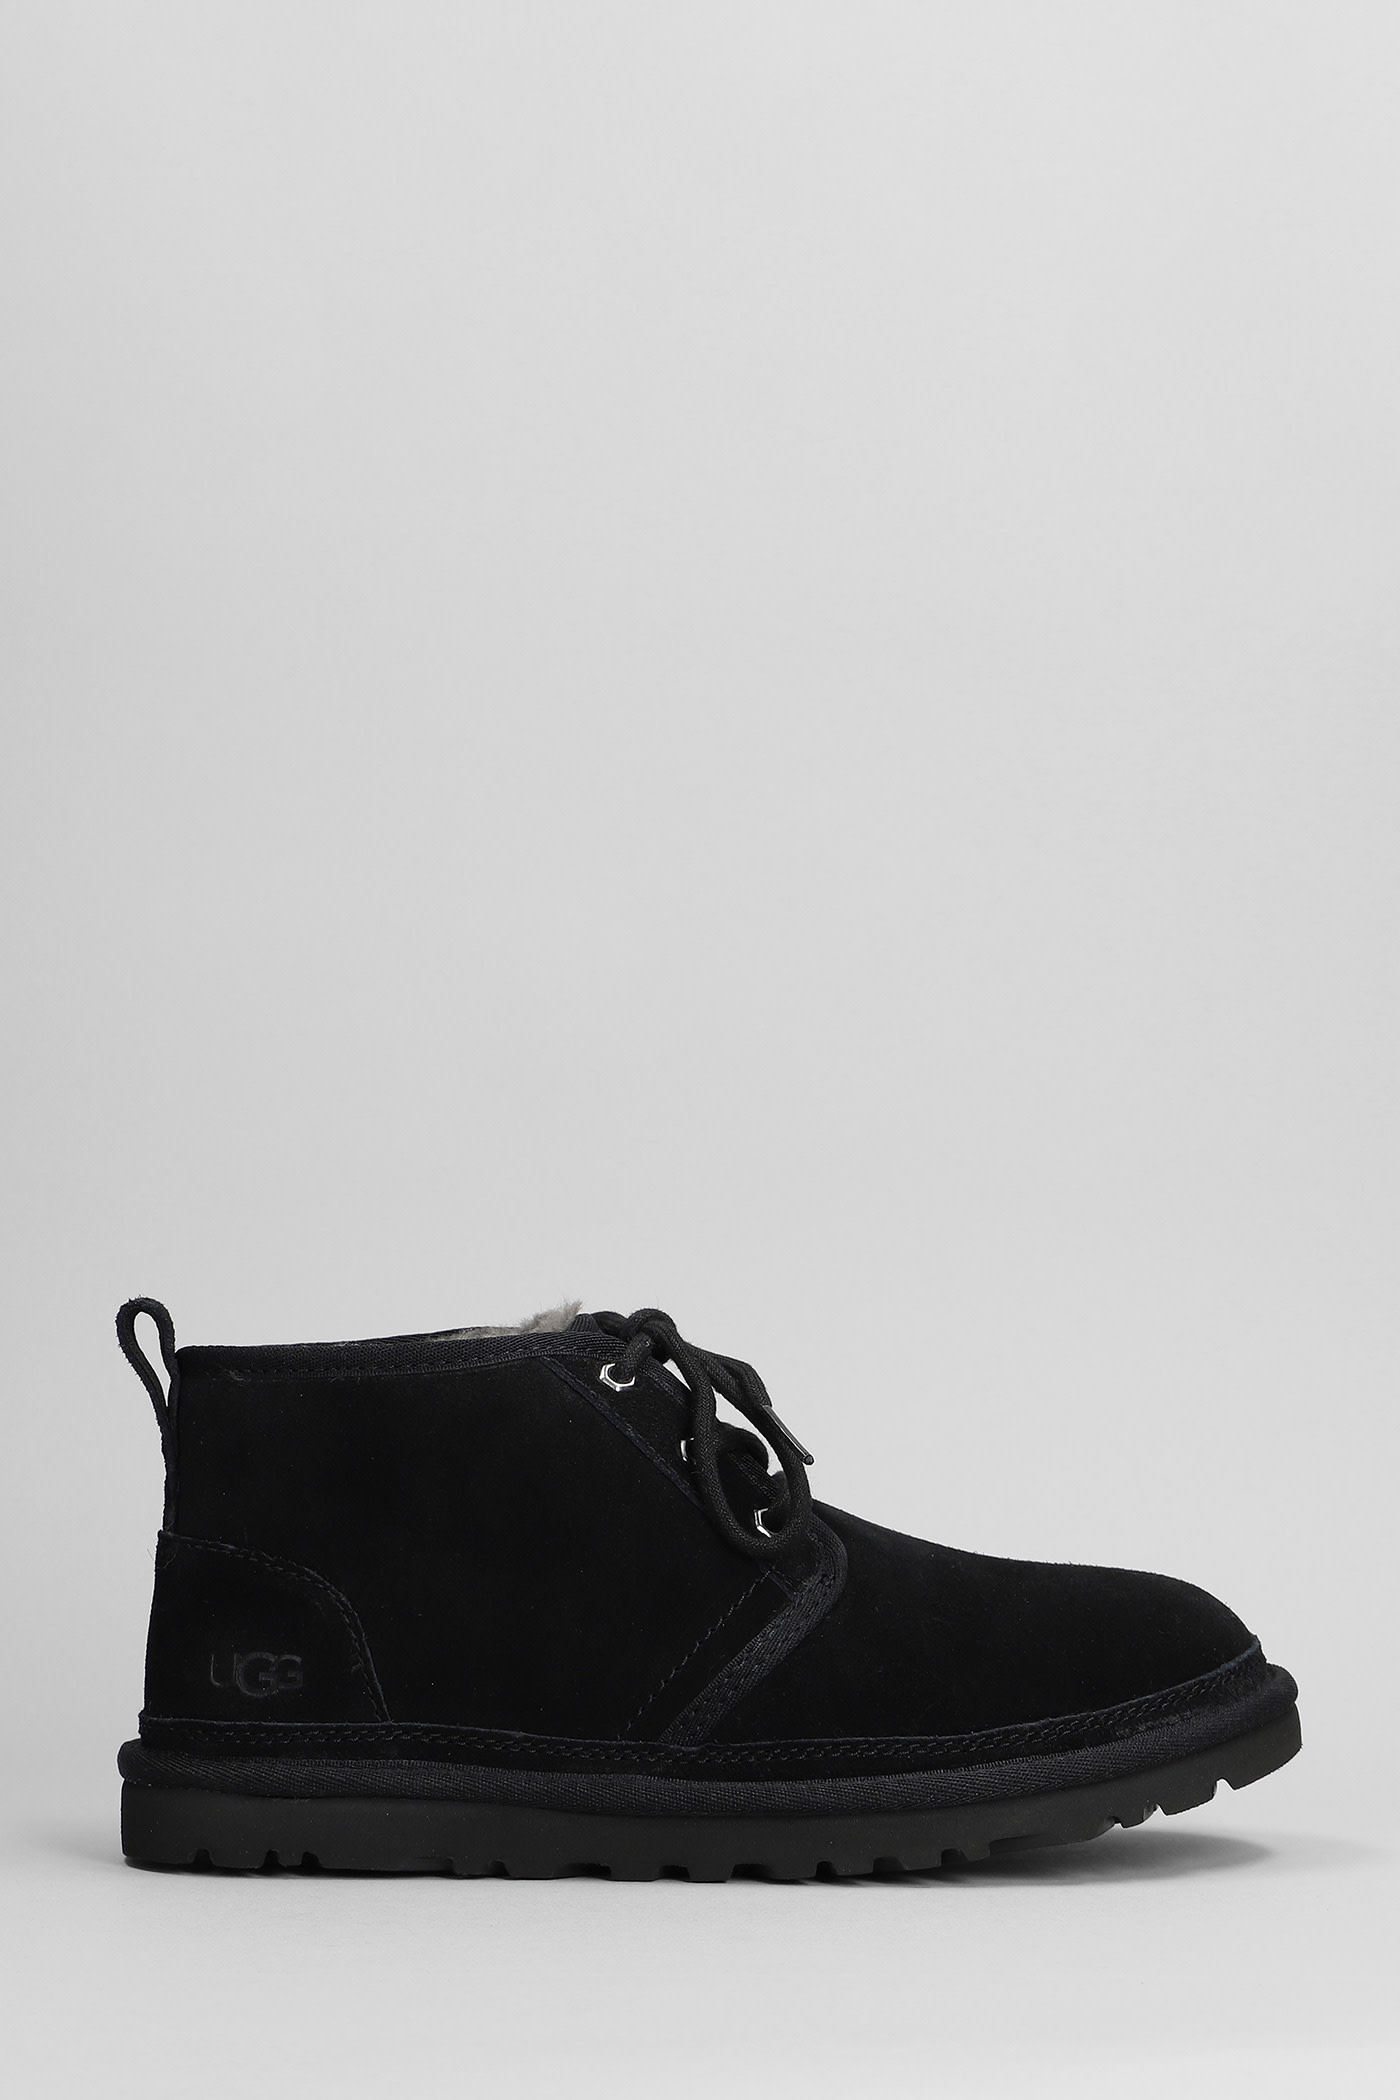 UGG NEUMEL LACE UP SHOES IN BLACK SUEDE